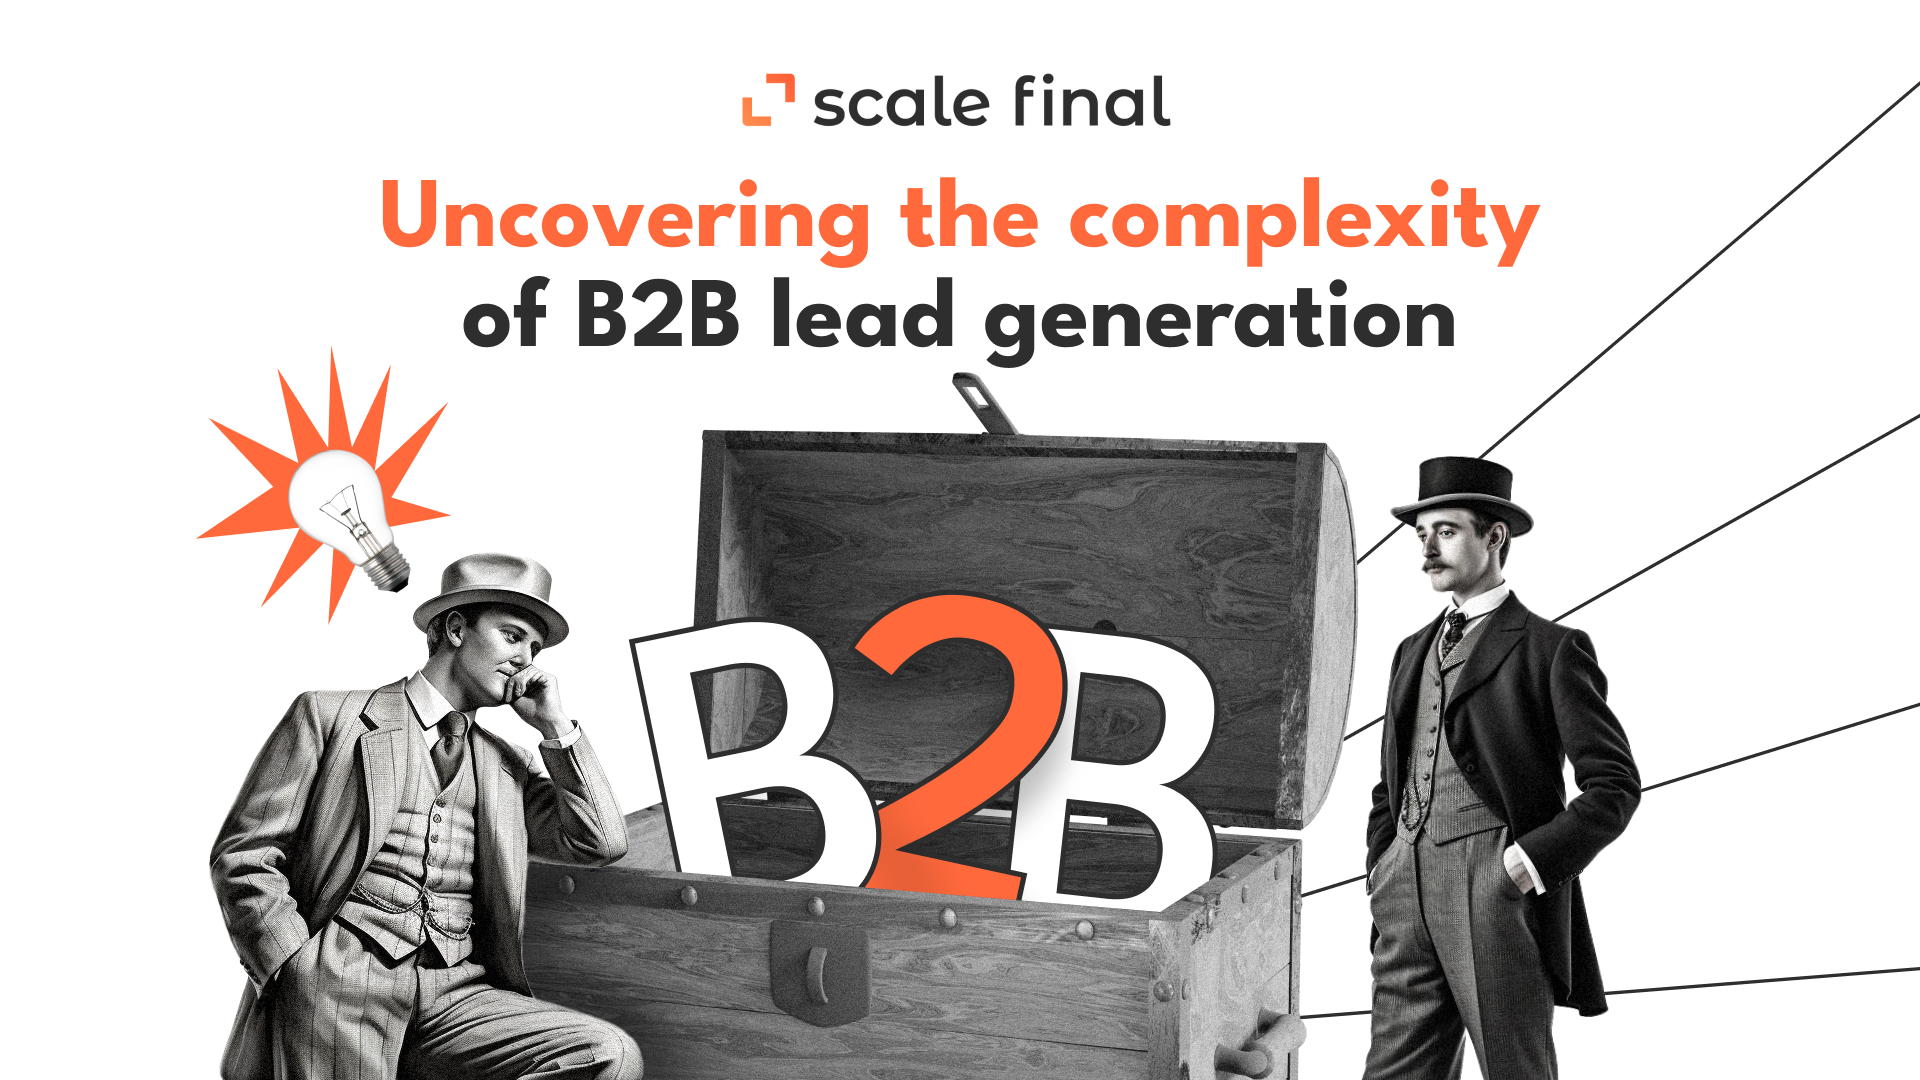 Uncovering the complexity of B2B lead generation